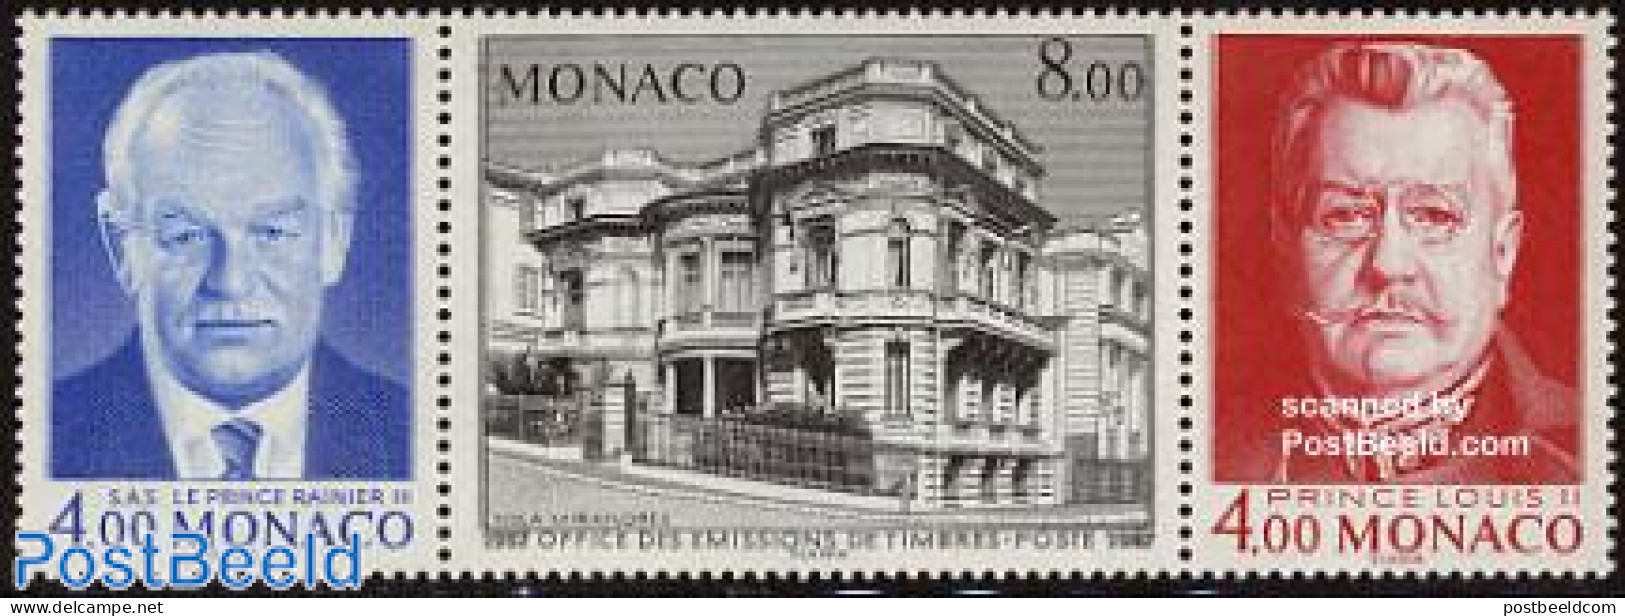 Monaco 1987 Stamp Bureau 3v [::], Mint NH, History - Kings & Queens (Royalty) - Philately - Art - Architecture - Neufs